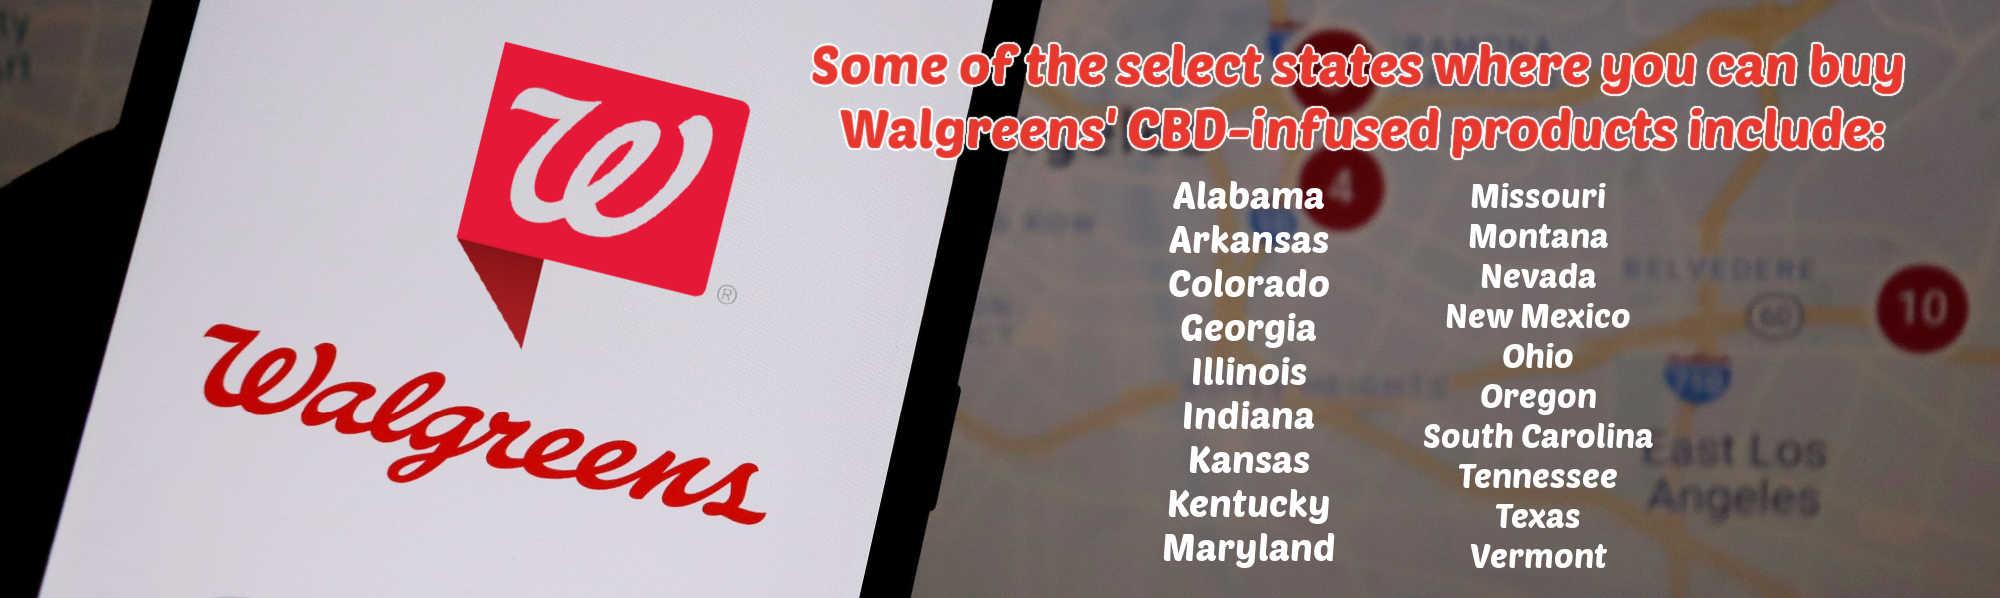 image of states where you can buy cbd infused products